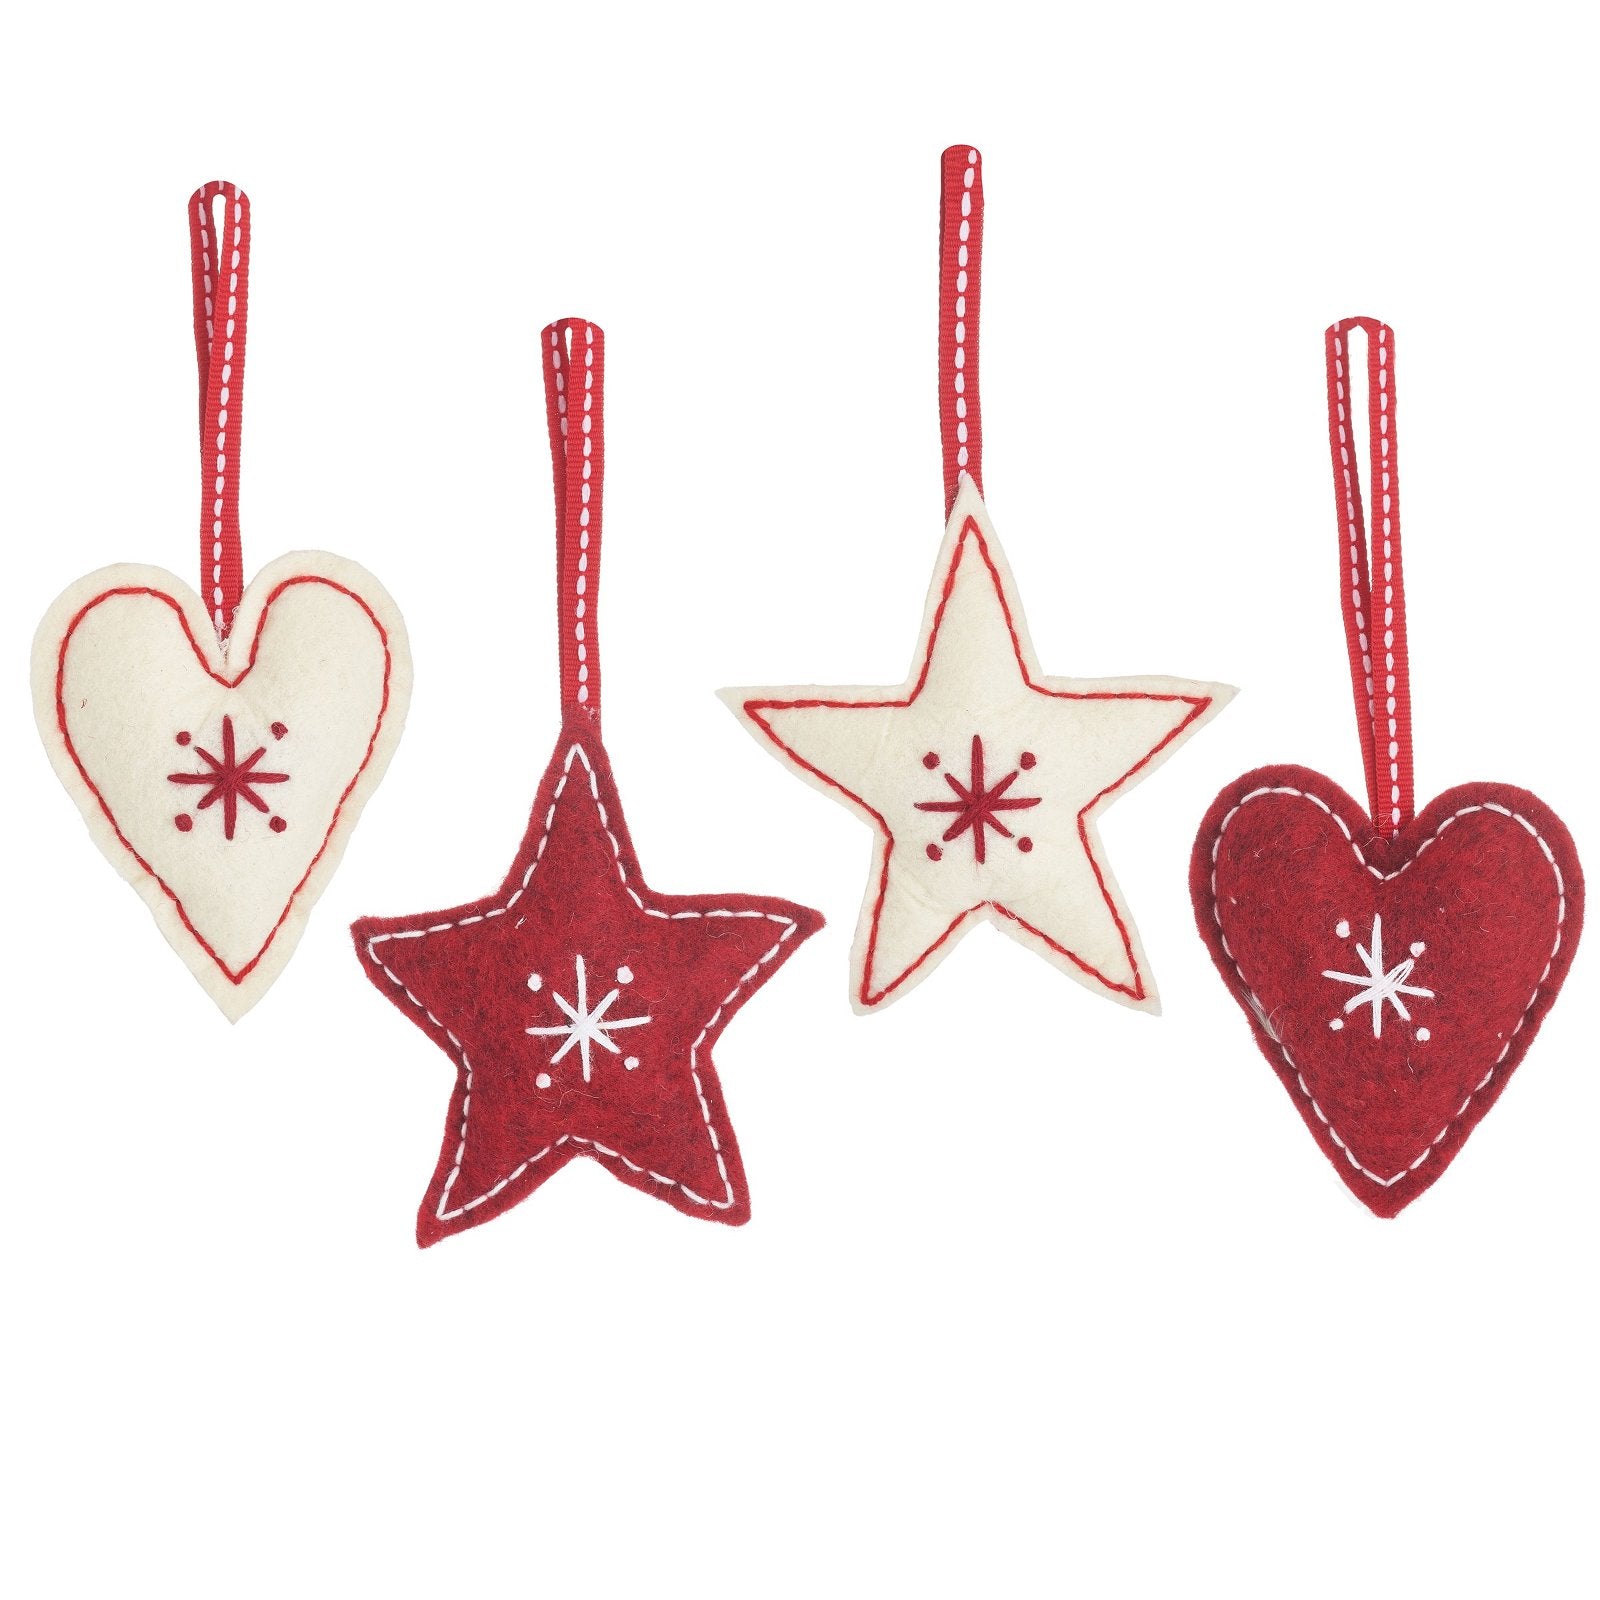 View Felt Hearts and Stars Hanging Decorations Set of 4 information